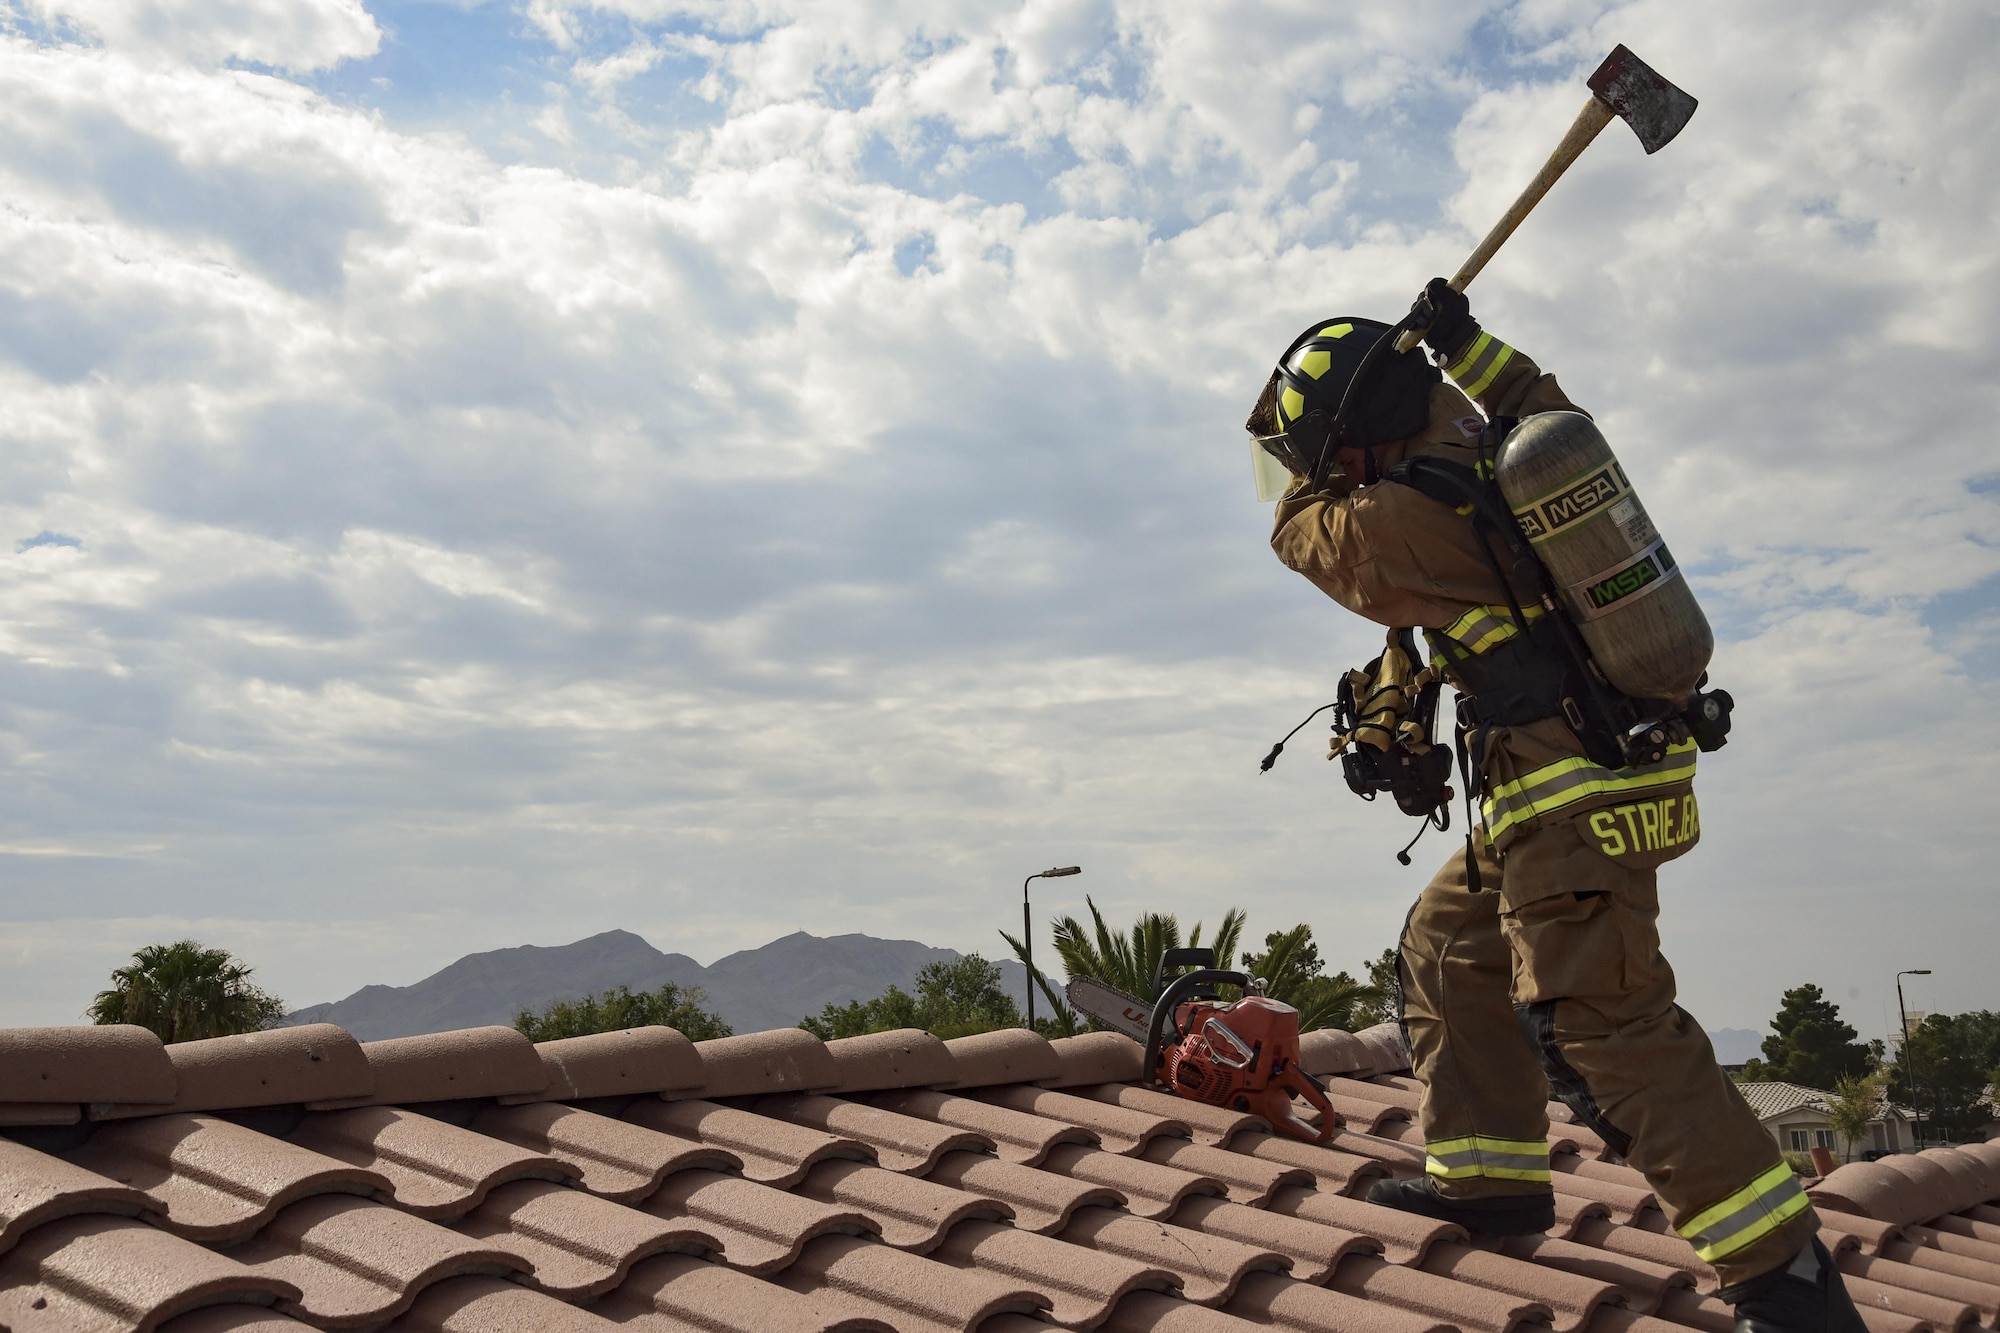 Airman 1st Class Adam Striejewske, 99th Civil Engineer Squadron firefighter, simulates breaking roof tiles during Red Flag 17-3 at Nellis Air Force Base, Nev., July 18, 2017. Breaking and removing roof tiles allows smoke from a building fire to escape easier. As the smoke leaves the building, rescue teams inside have better visibility to thoroughly search the building. (U.S. Air Force photo by Airman 1st Class Andrew D. Sarver/Released)